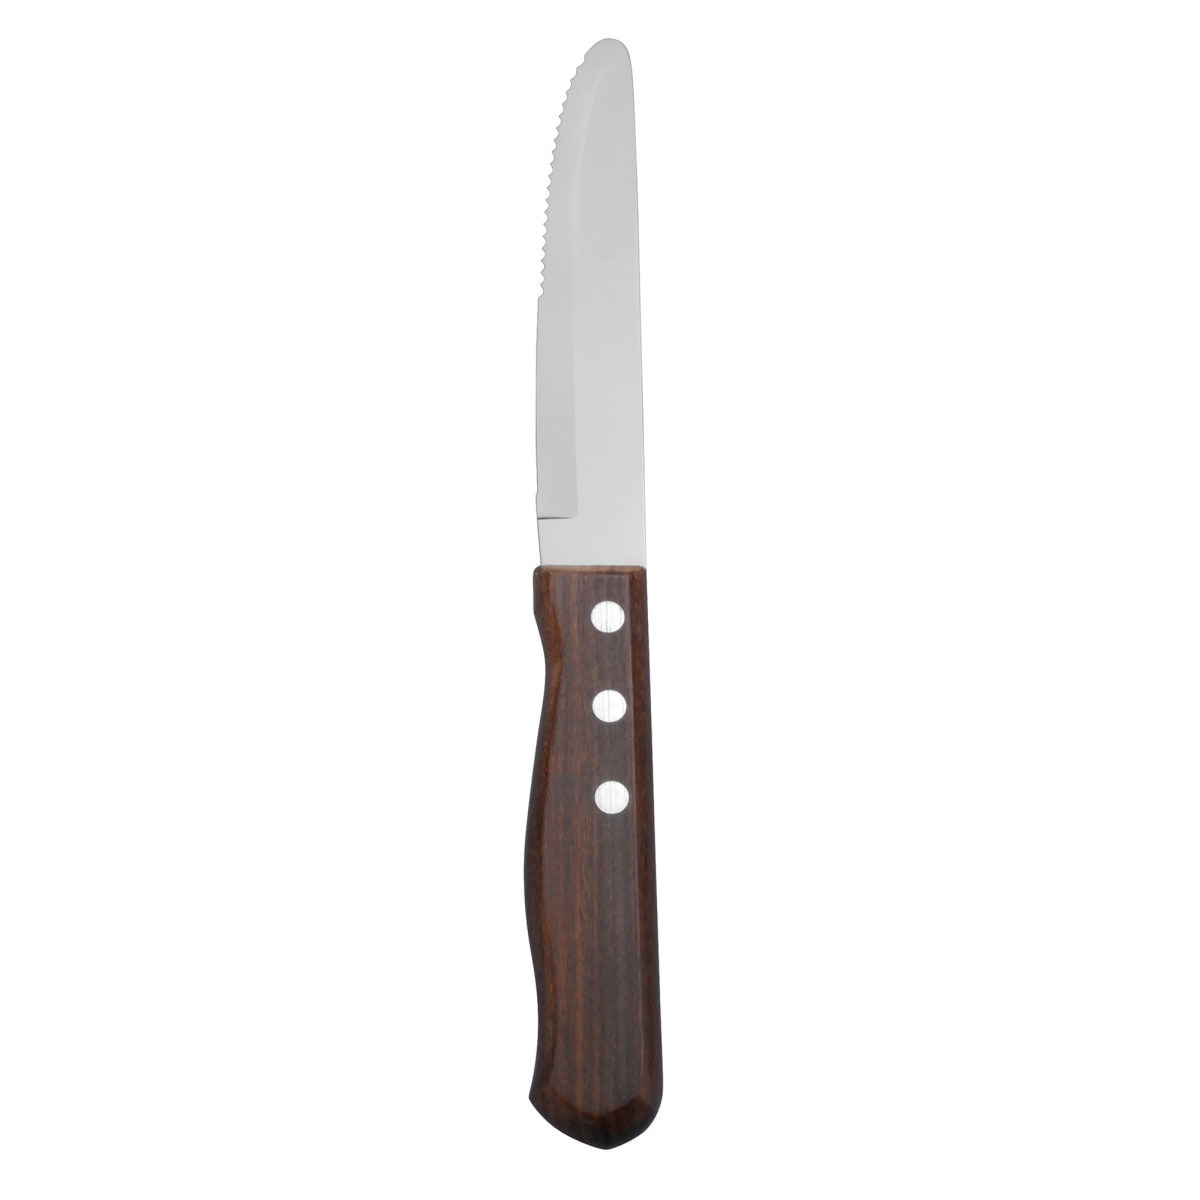 Delco Econoline by 1880 Hospitality B614KSSF 8 Stainless Steel Steak Knife  with Wood Handle - 36/Case